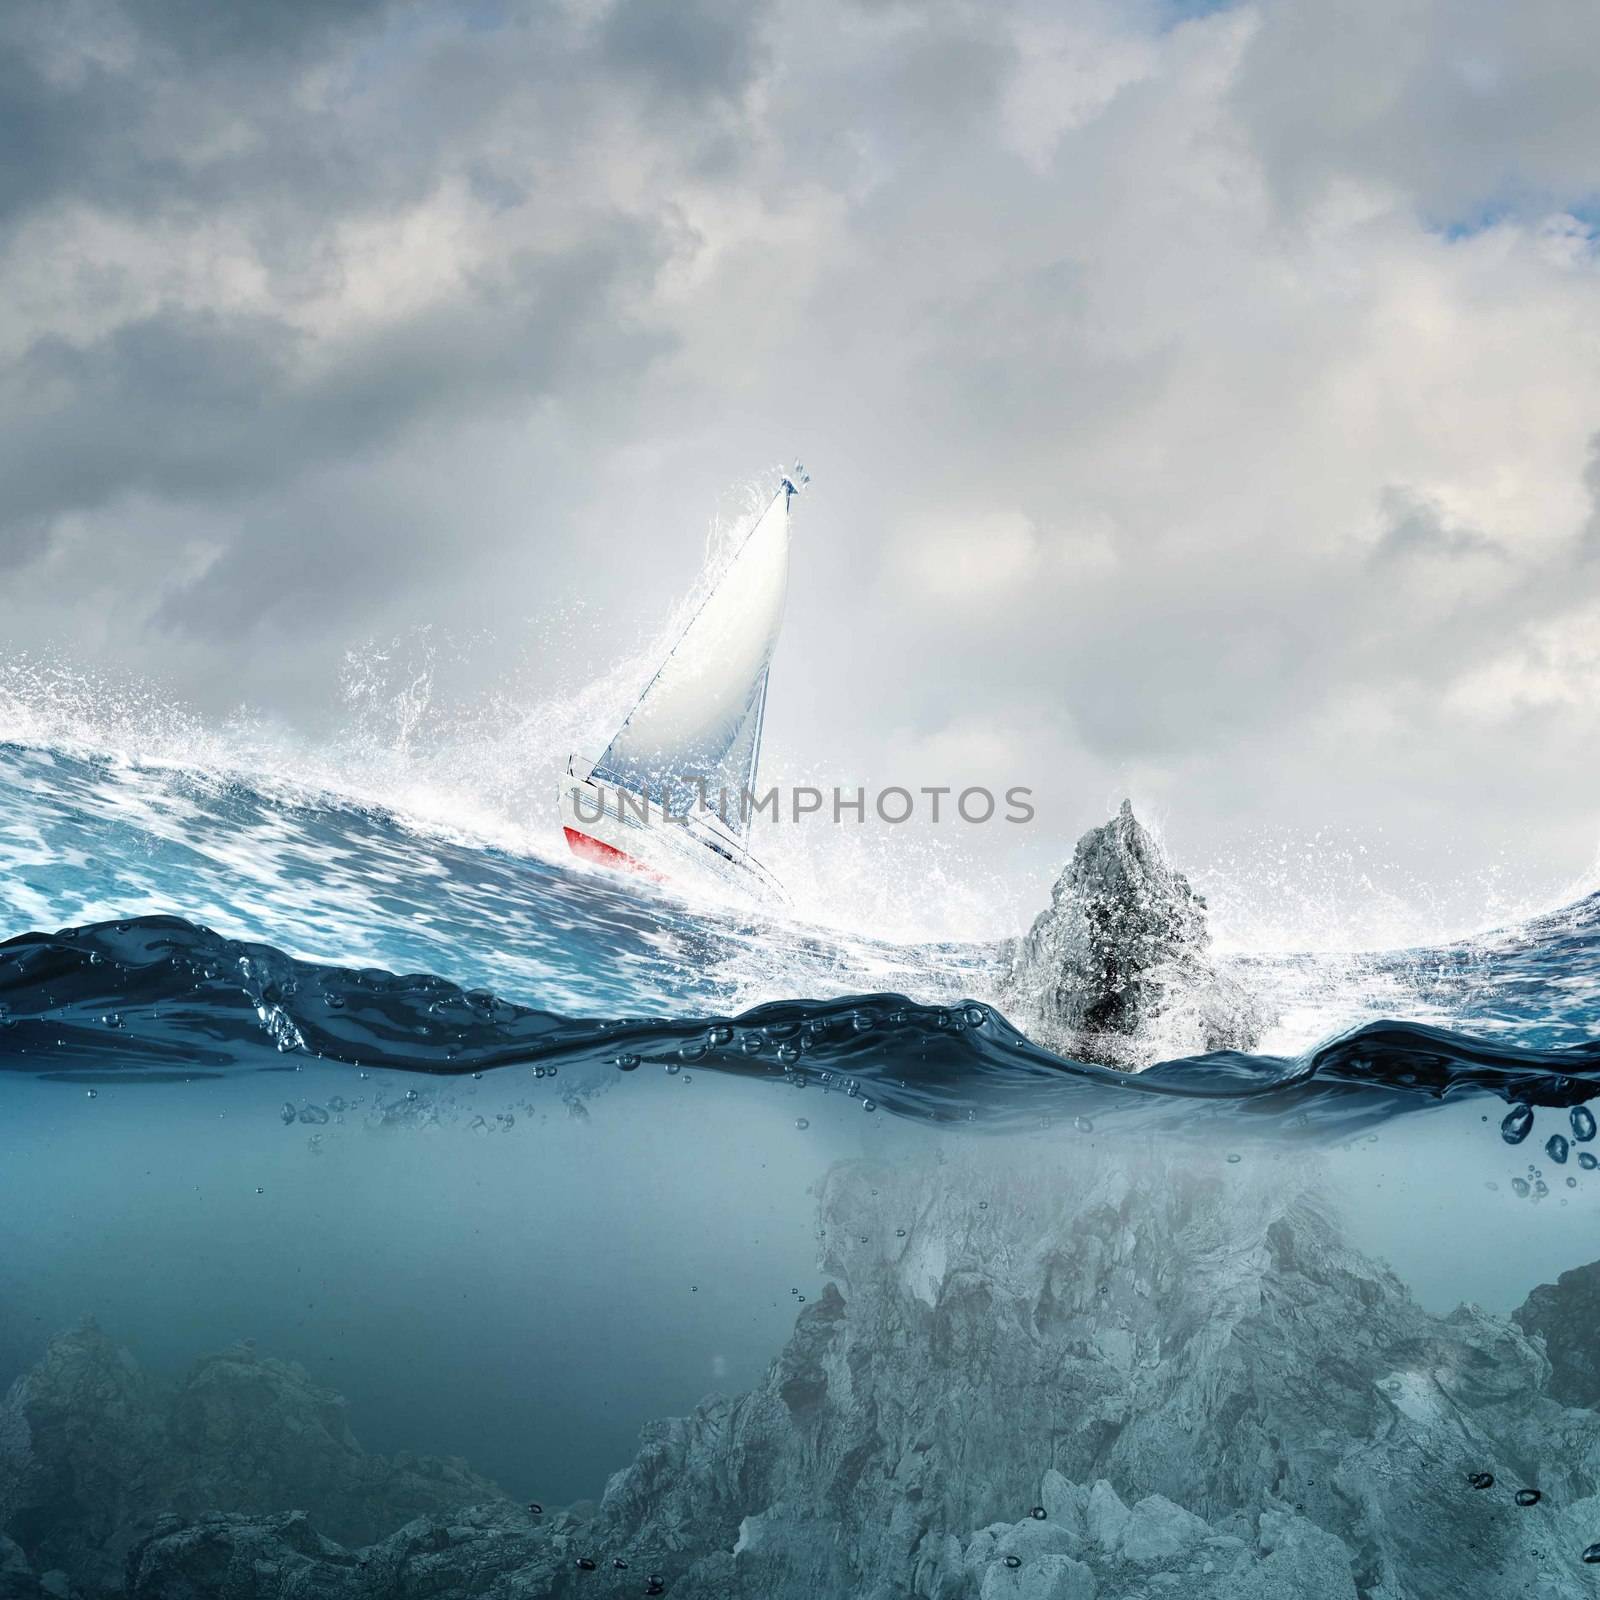 Submerged ocean view with yacht floating above